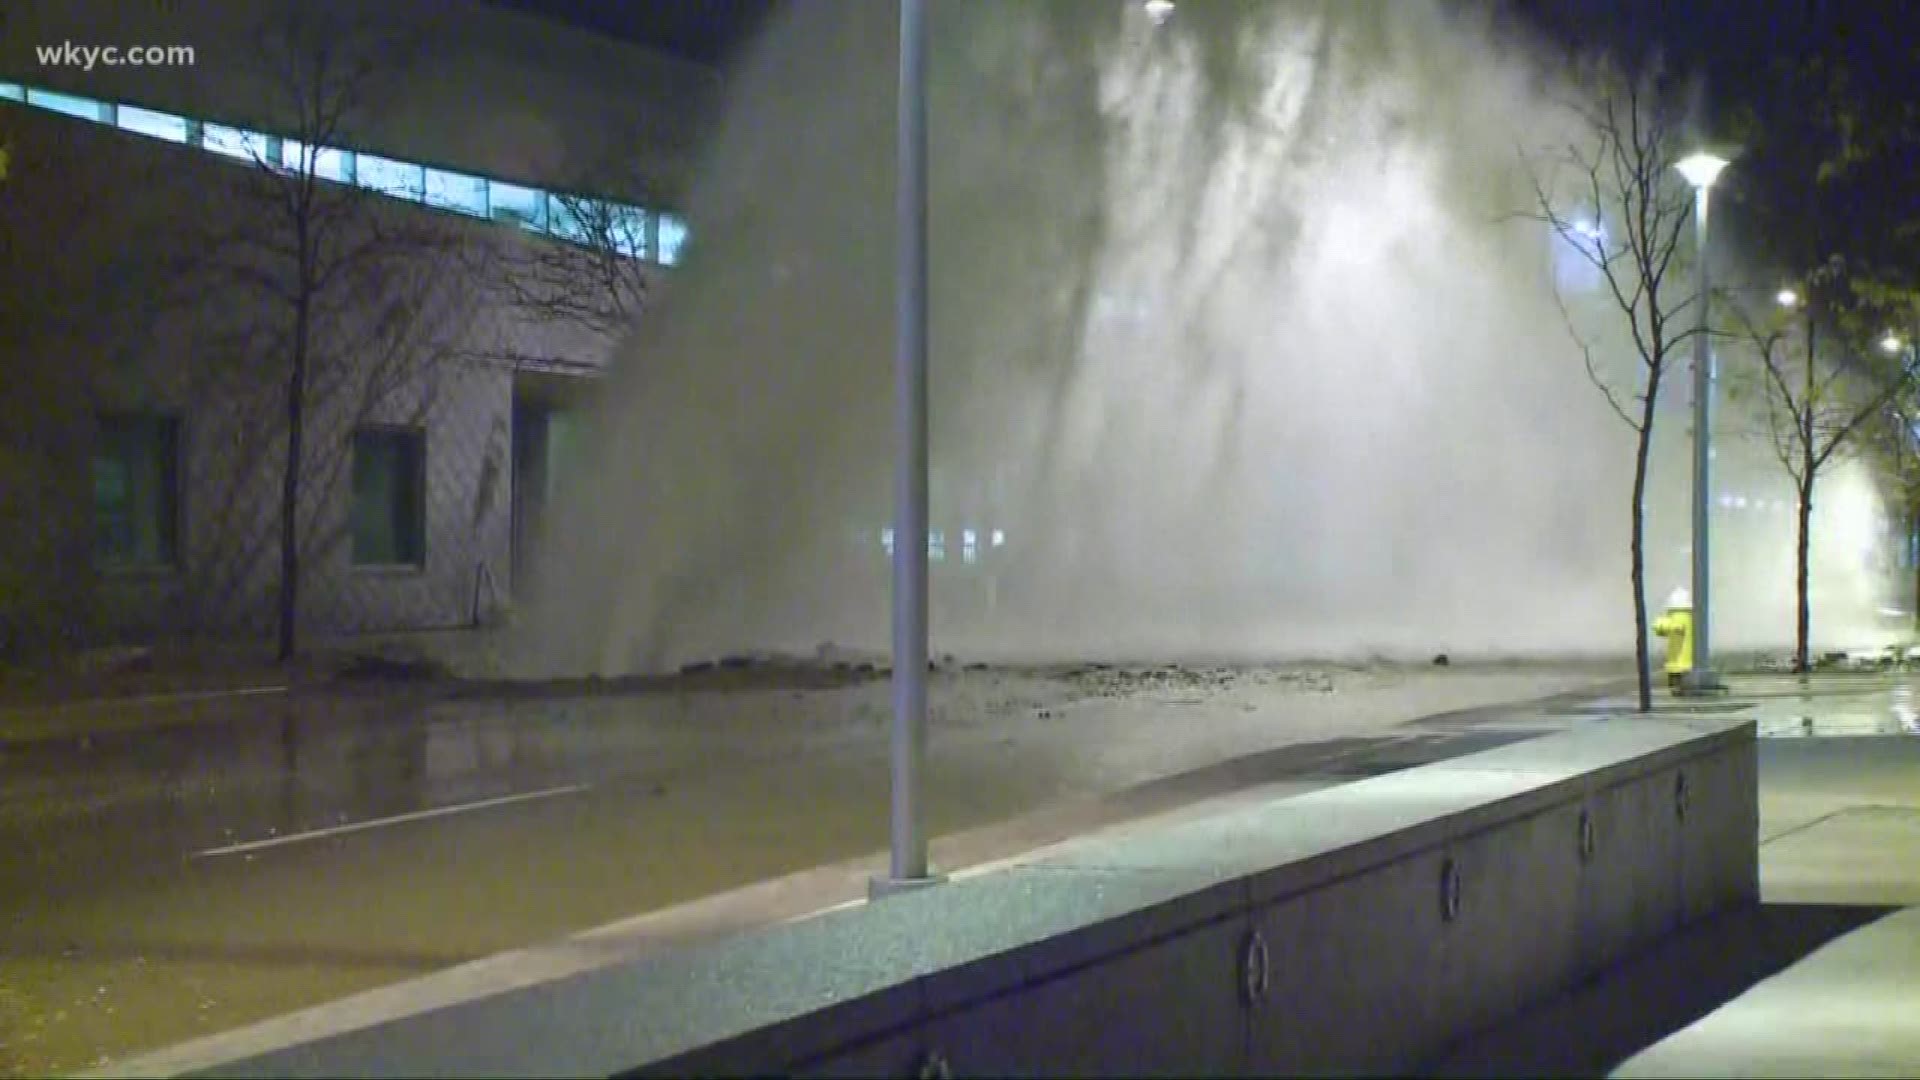 A water main break has closed a portion of High Street in downtown Akron, in front of the John S. Knight Center.